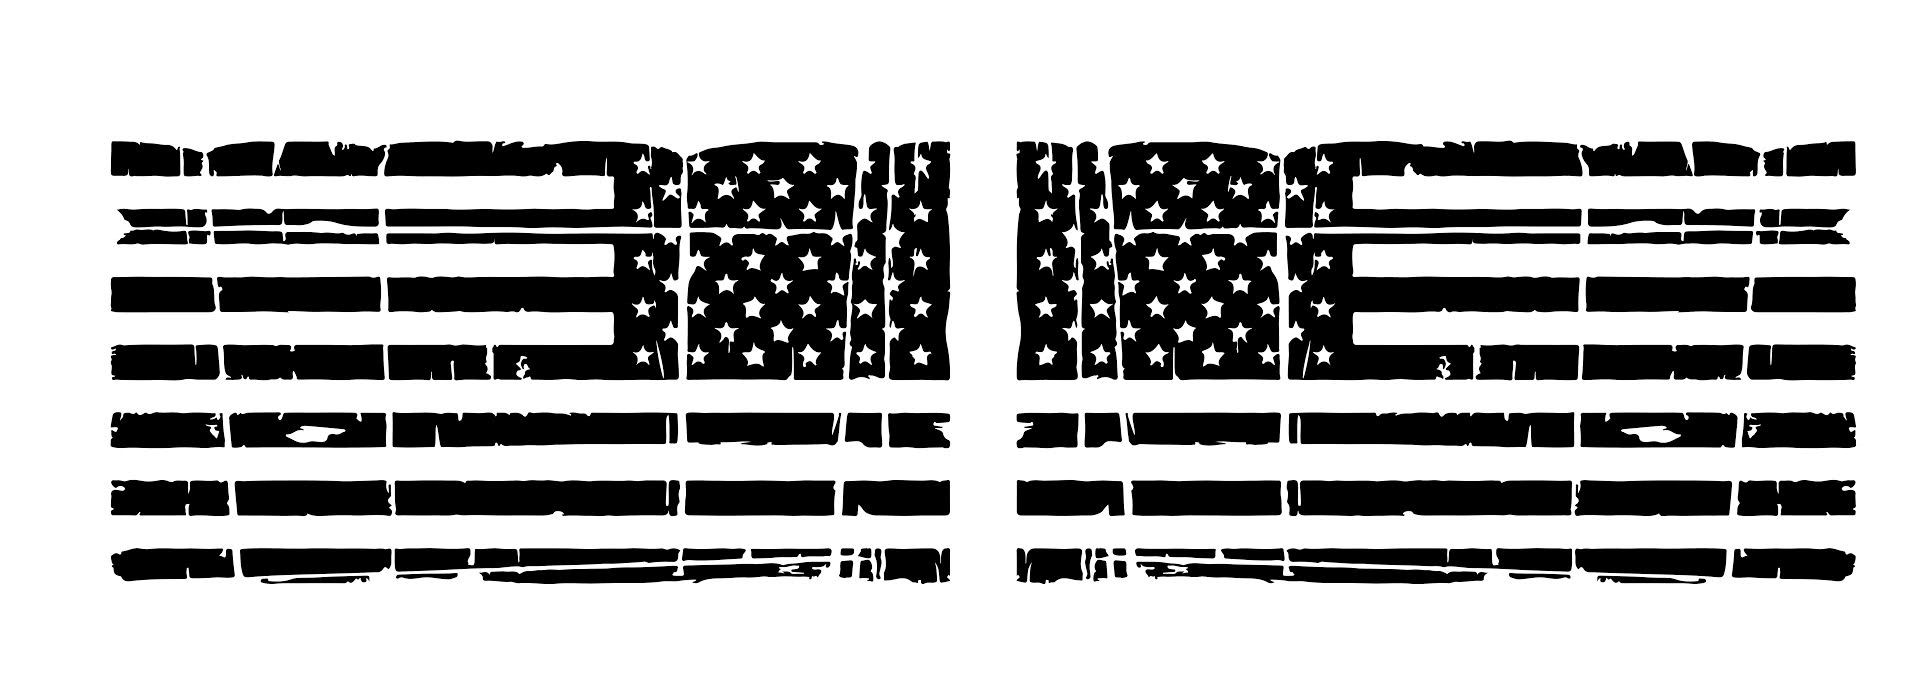 2x Distressed Black American Flag Sticker Decal Subdued USA Car Truck Grunge